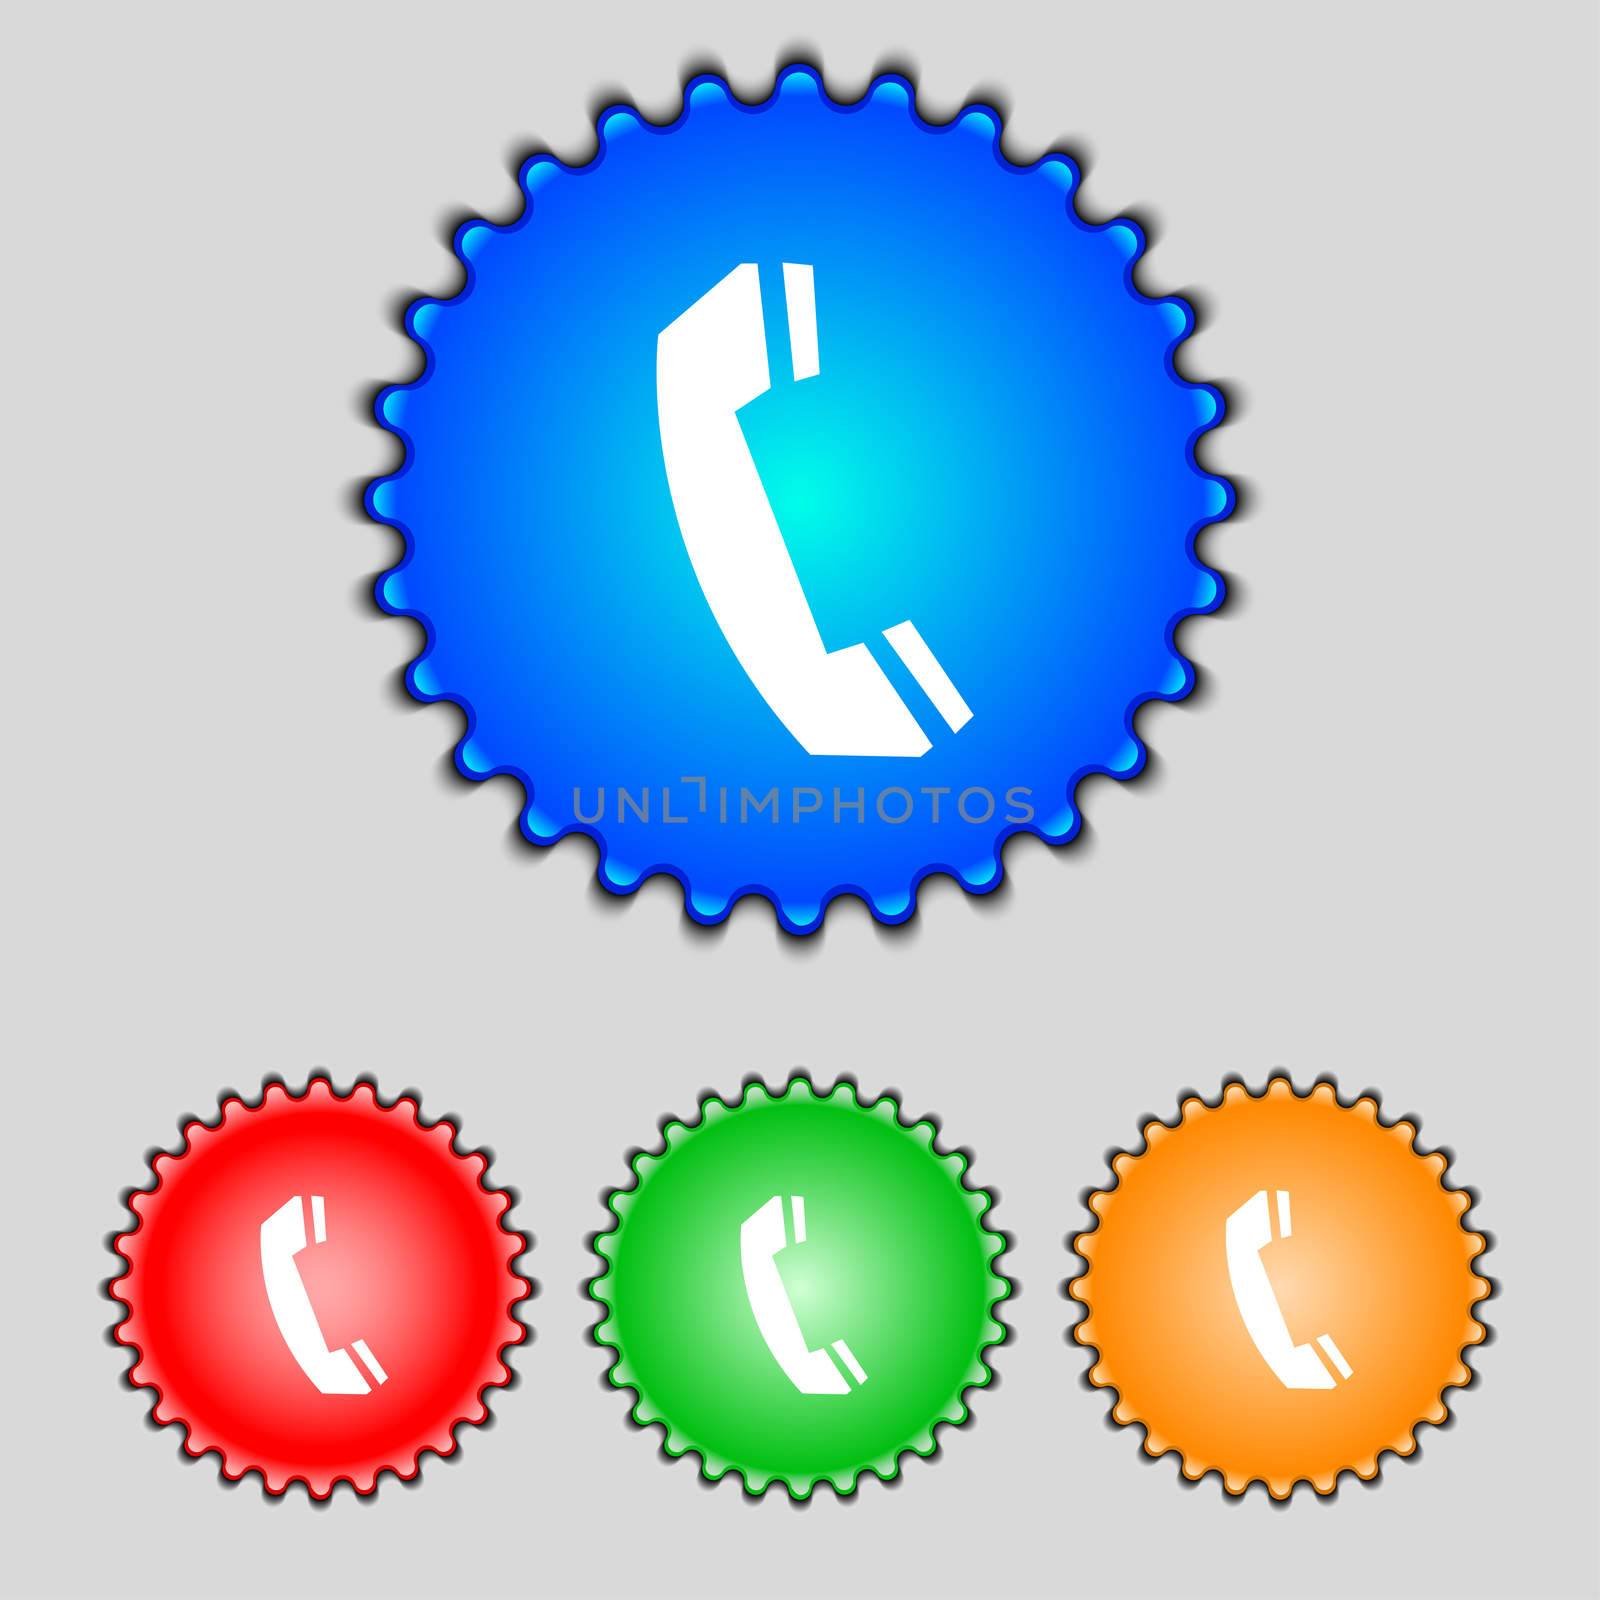 Phone sign icon. Support symbol. Call center. Set colourful buttons illustration